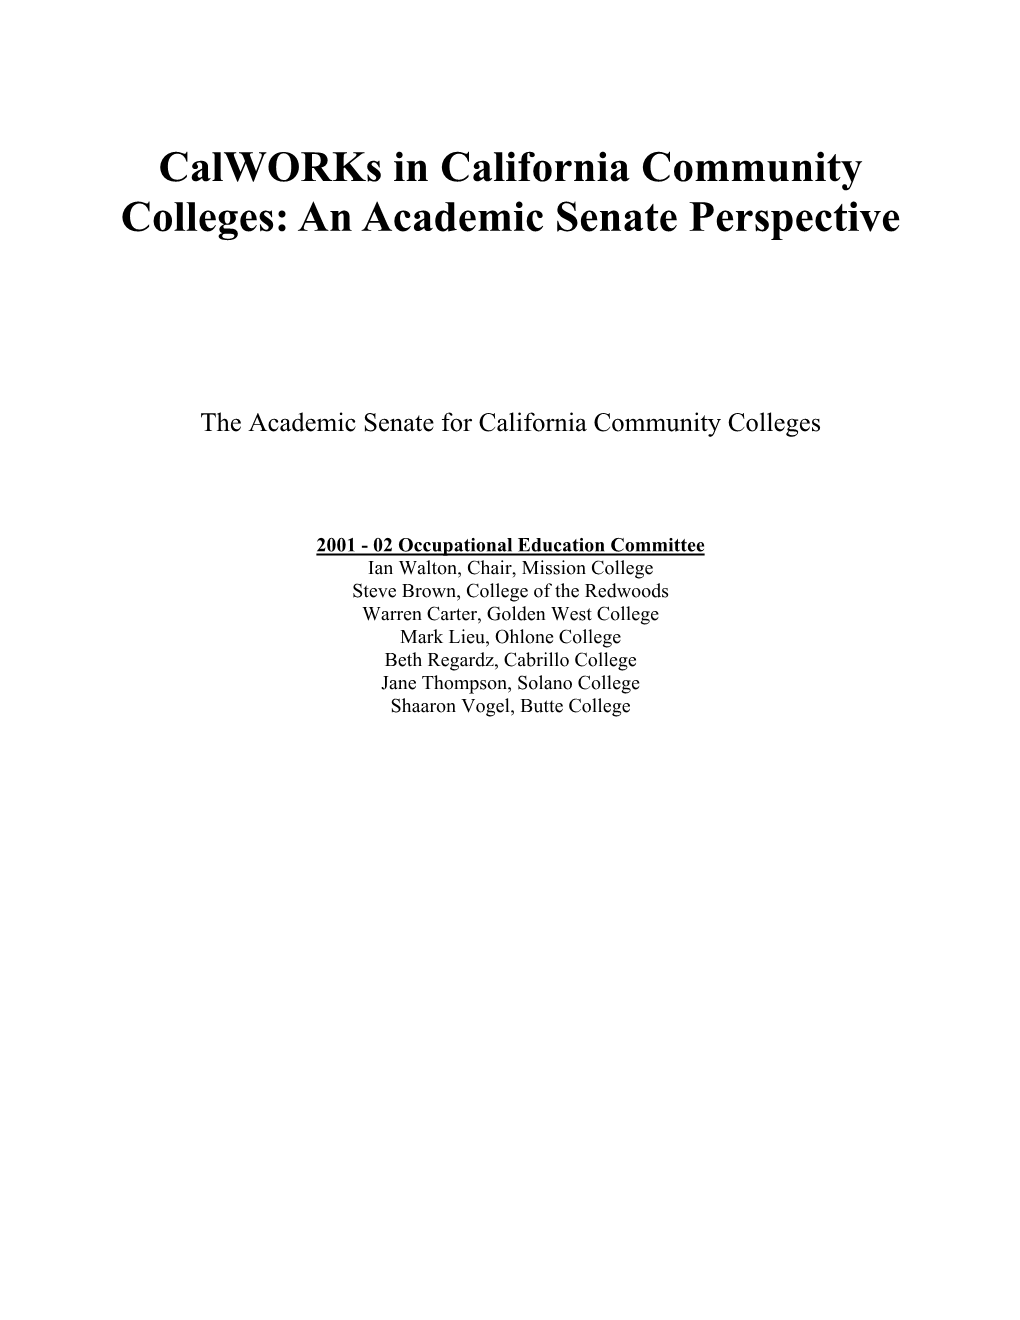 Calworks in California Community Colleges: an Academic Senate Perspective